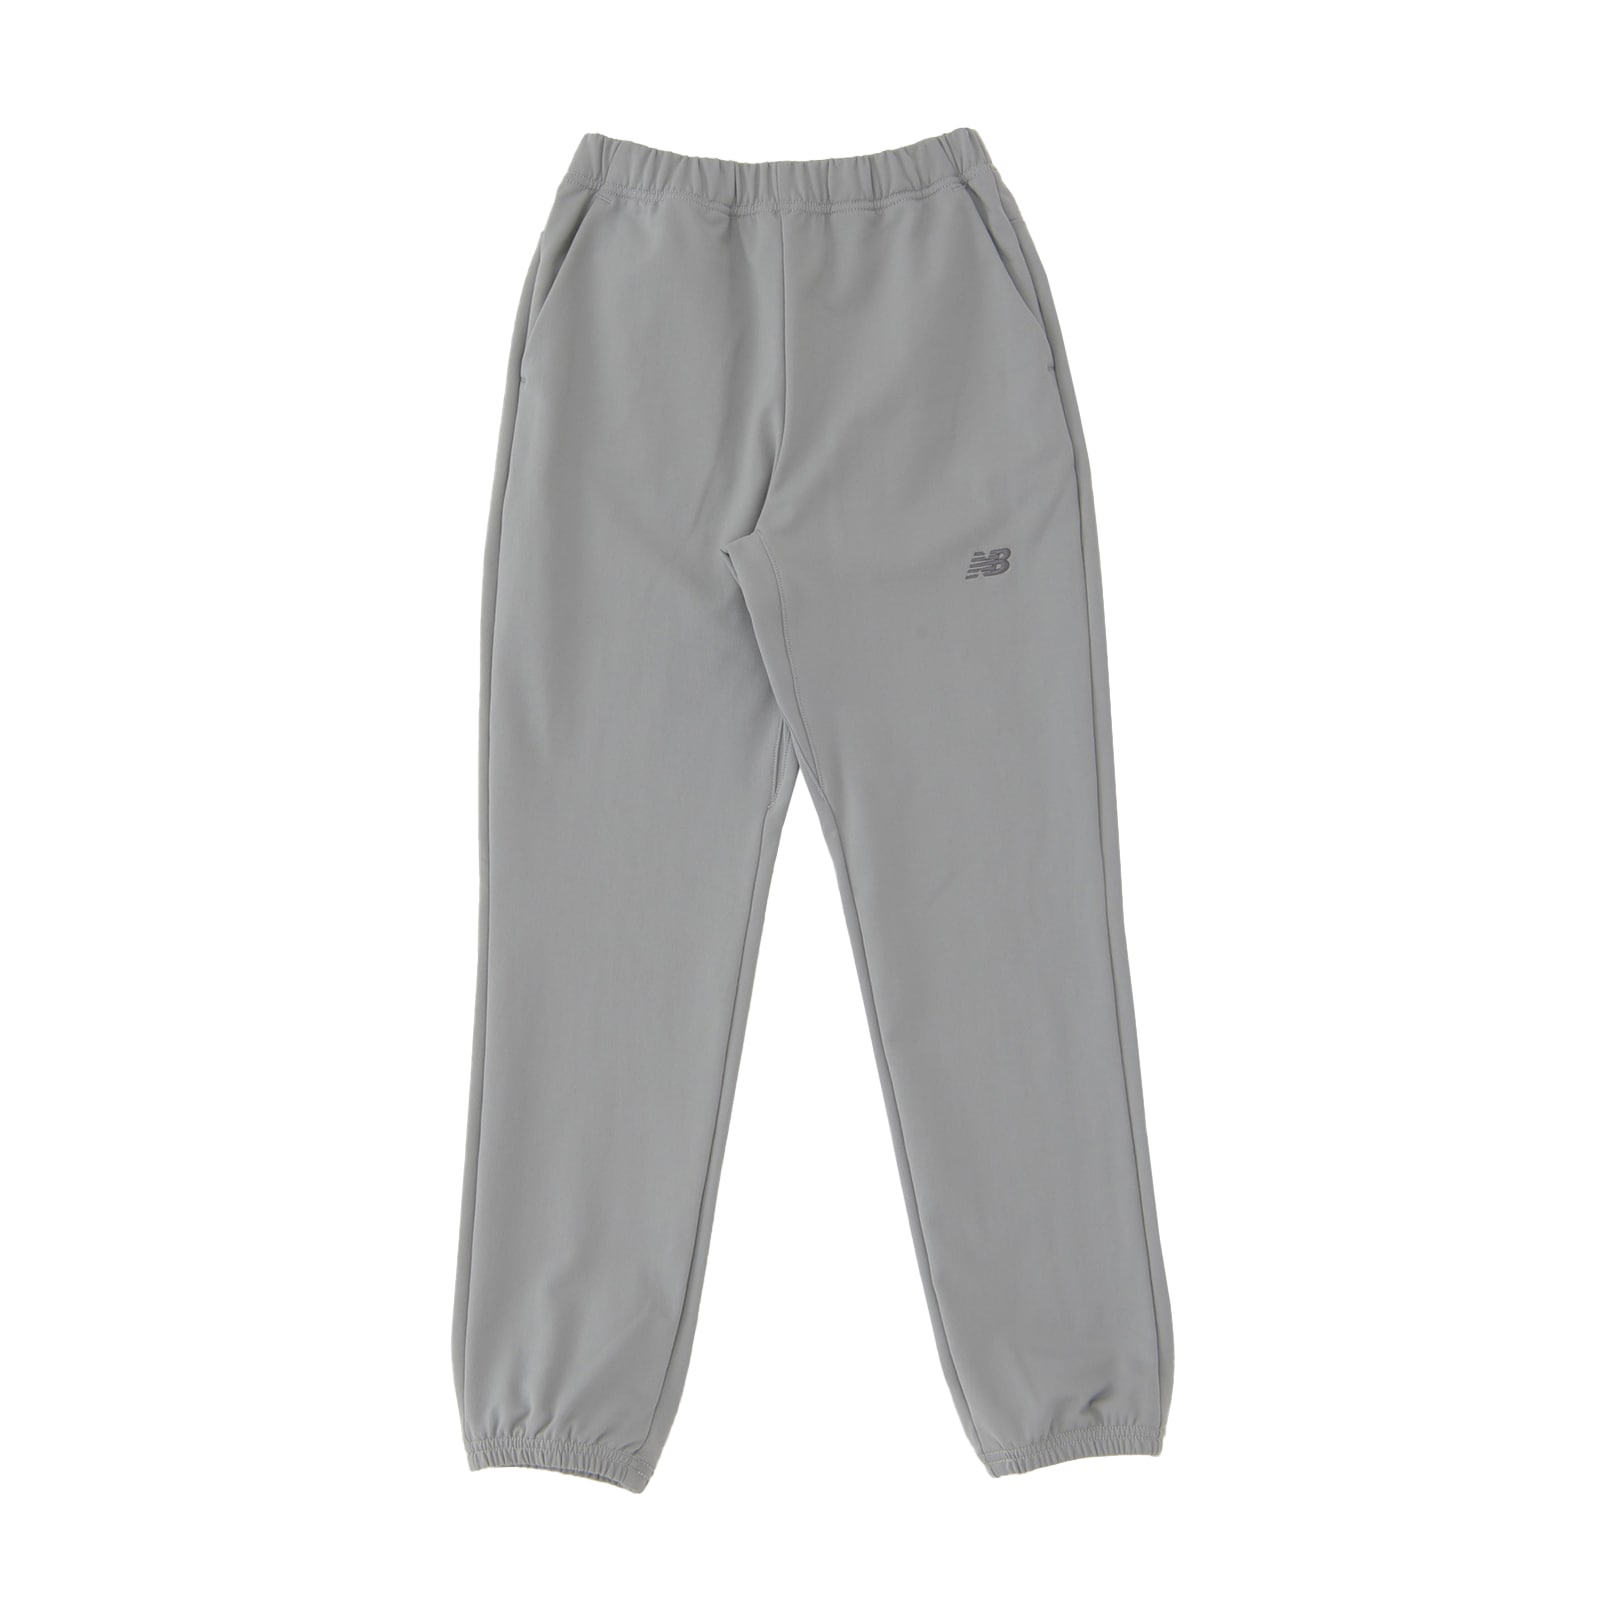 Moisture-wicking, quick-drying jogger pants